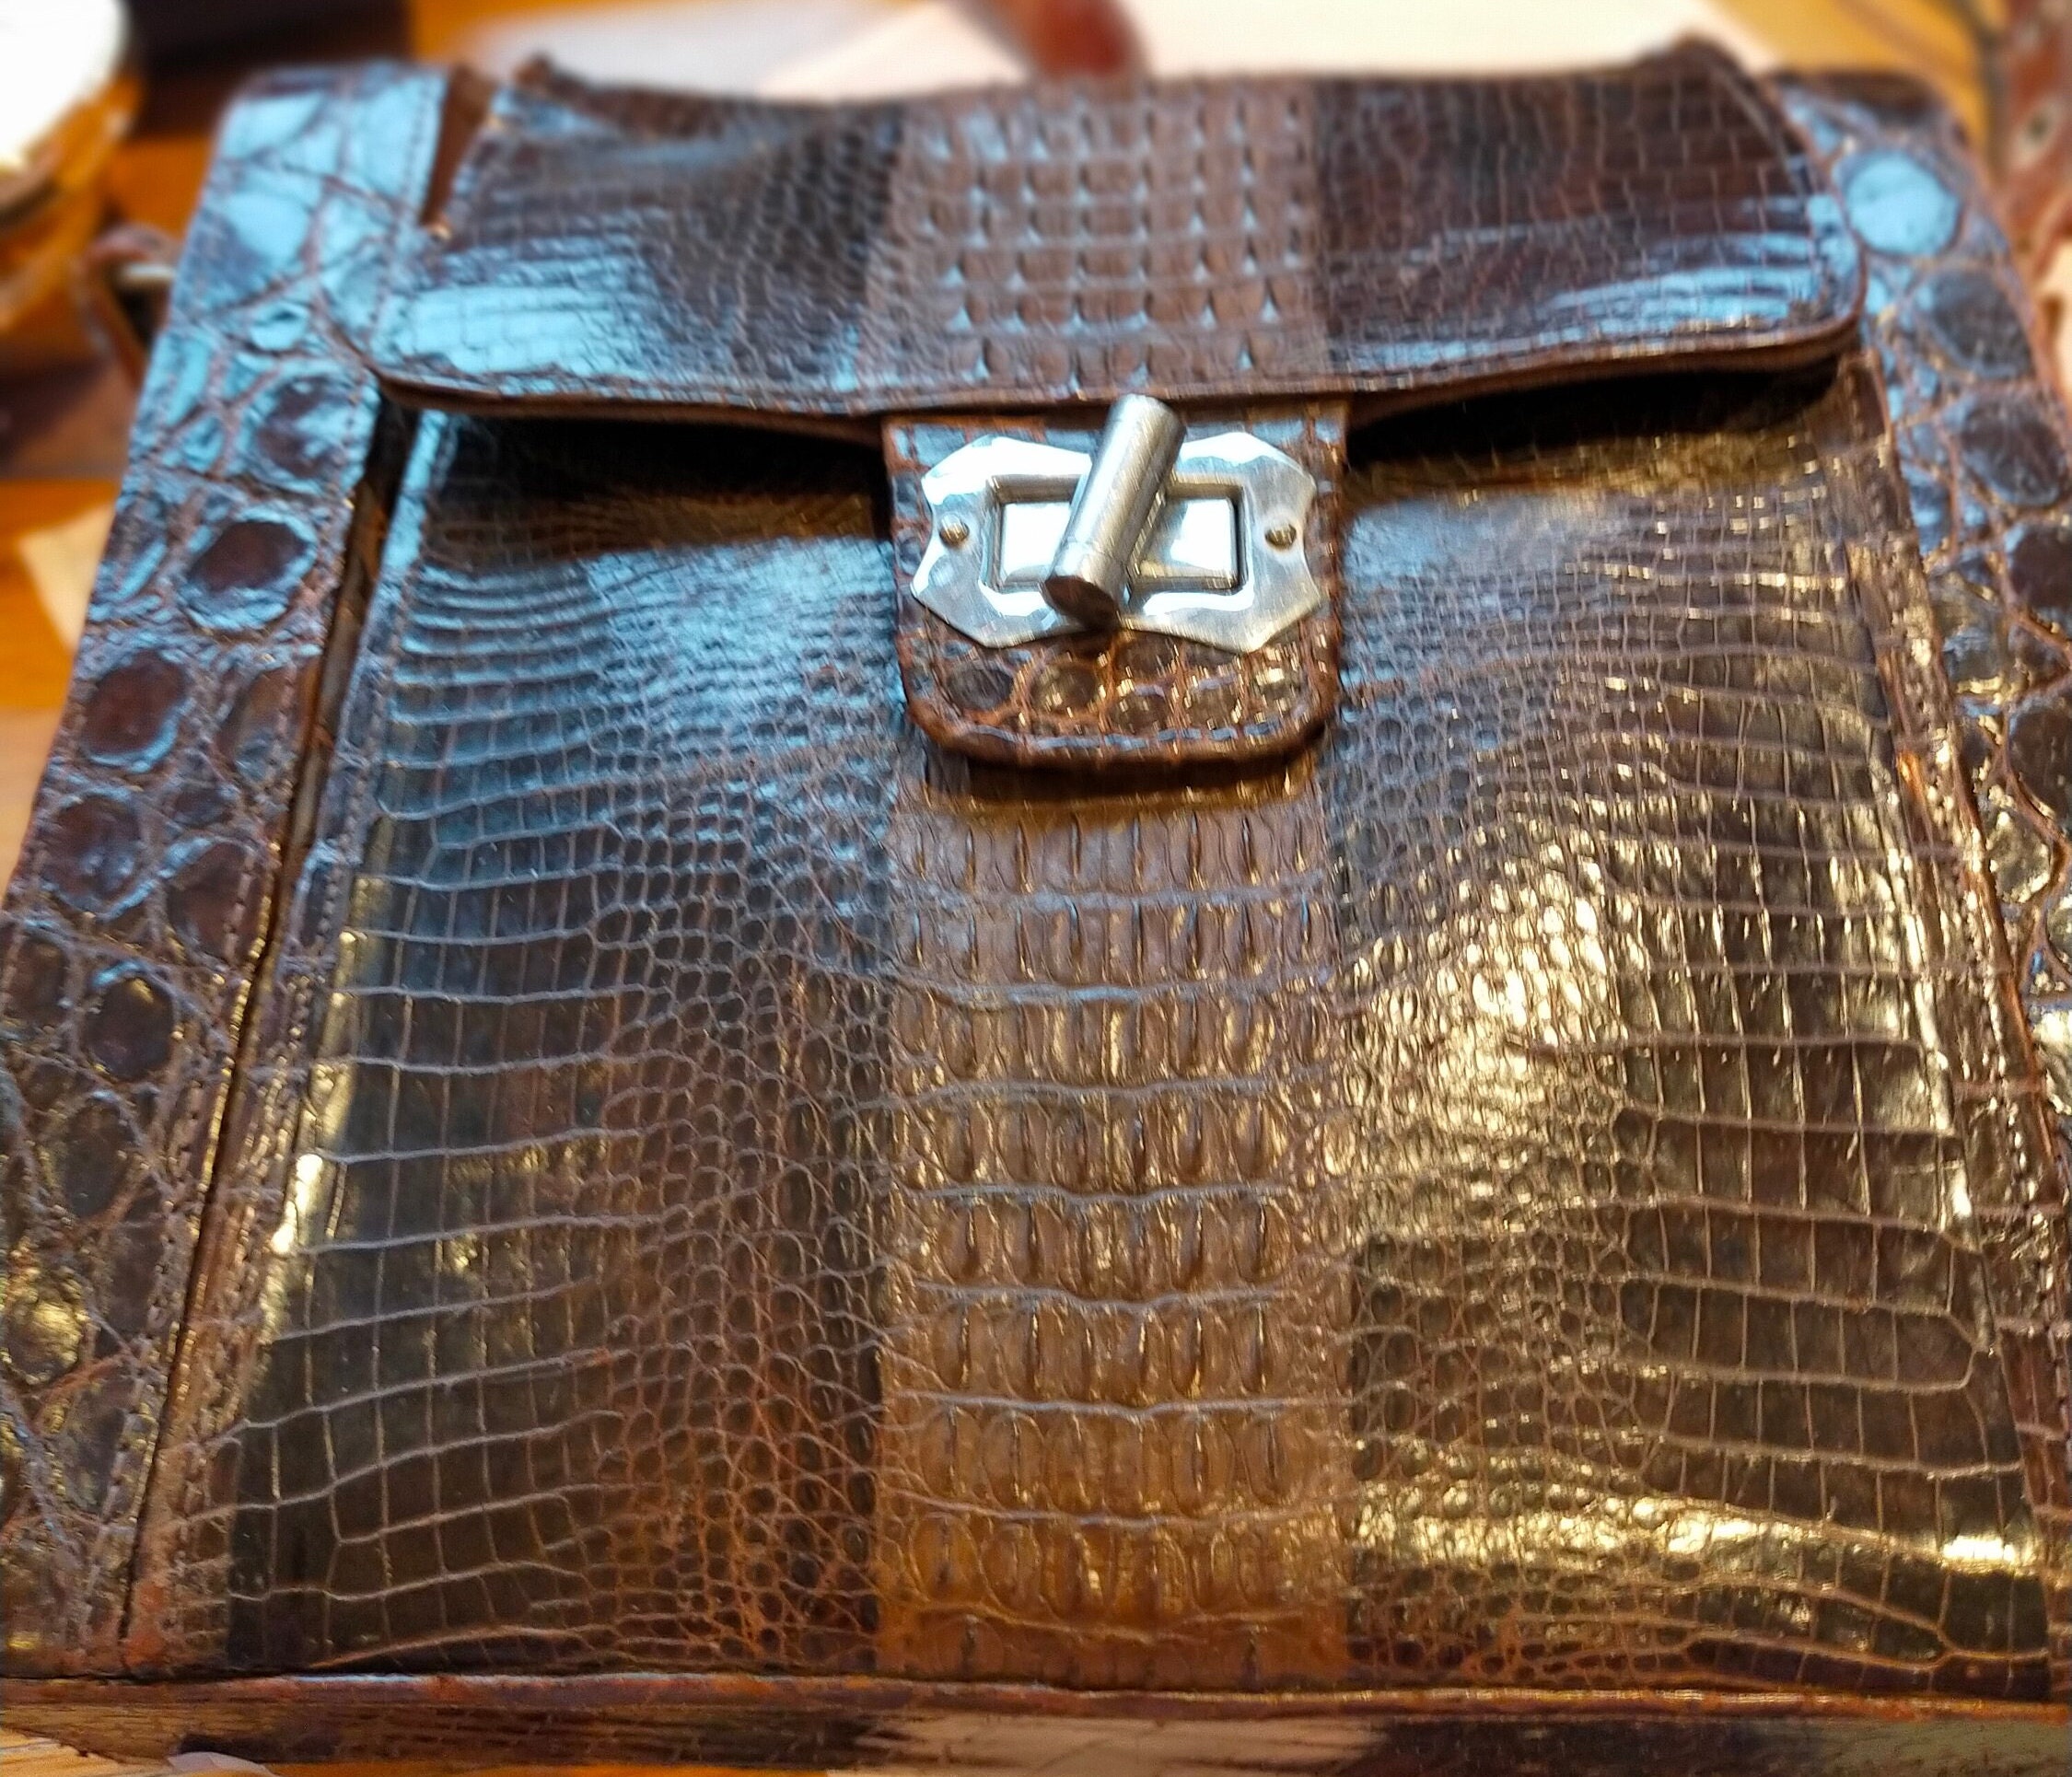 SILVER EMBOSSED CROCODILE LEATHER : Genuine Leather 2.5-3 oz. - Perfect for  Handbags and Leather Crafts!